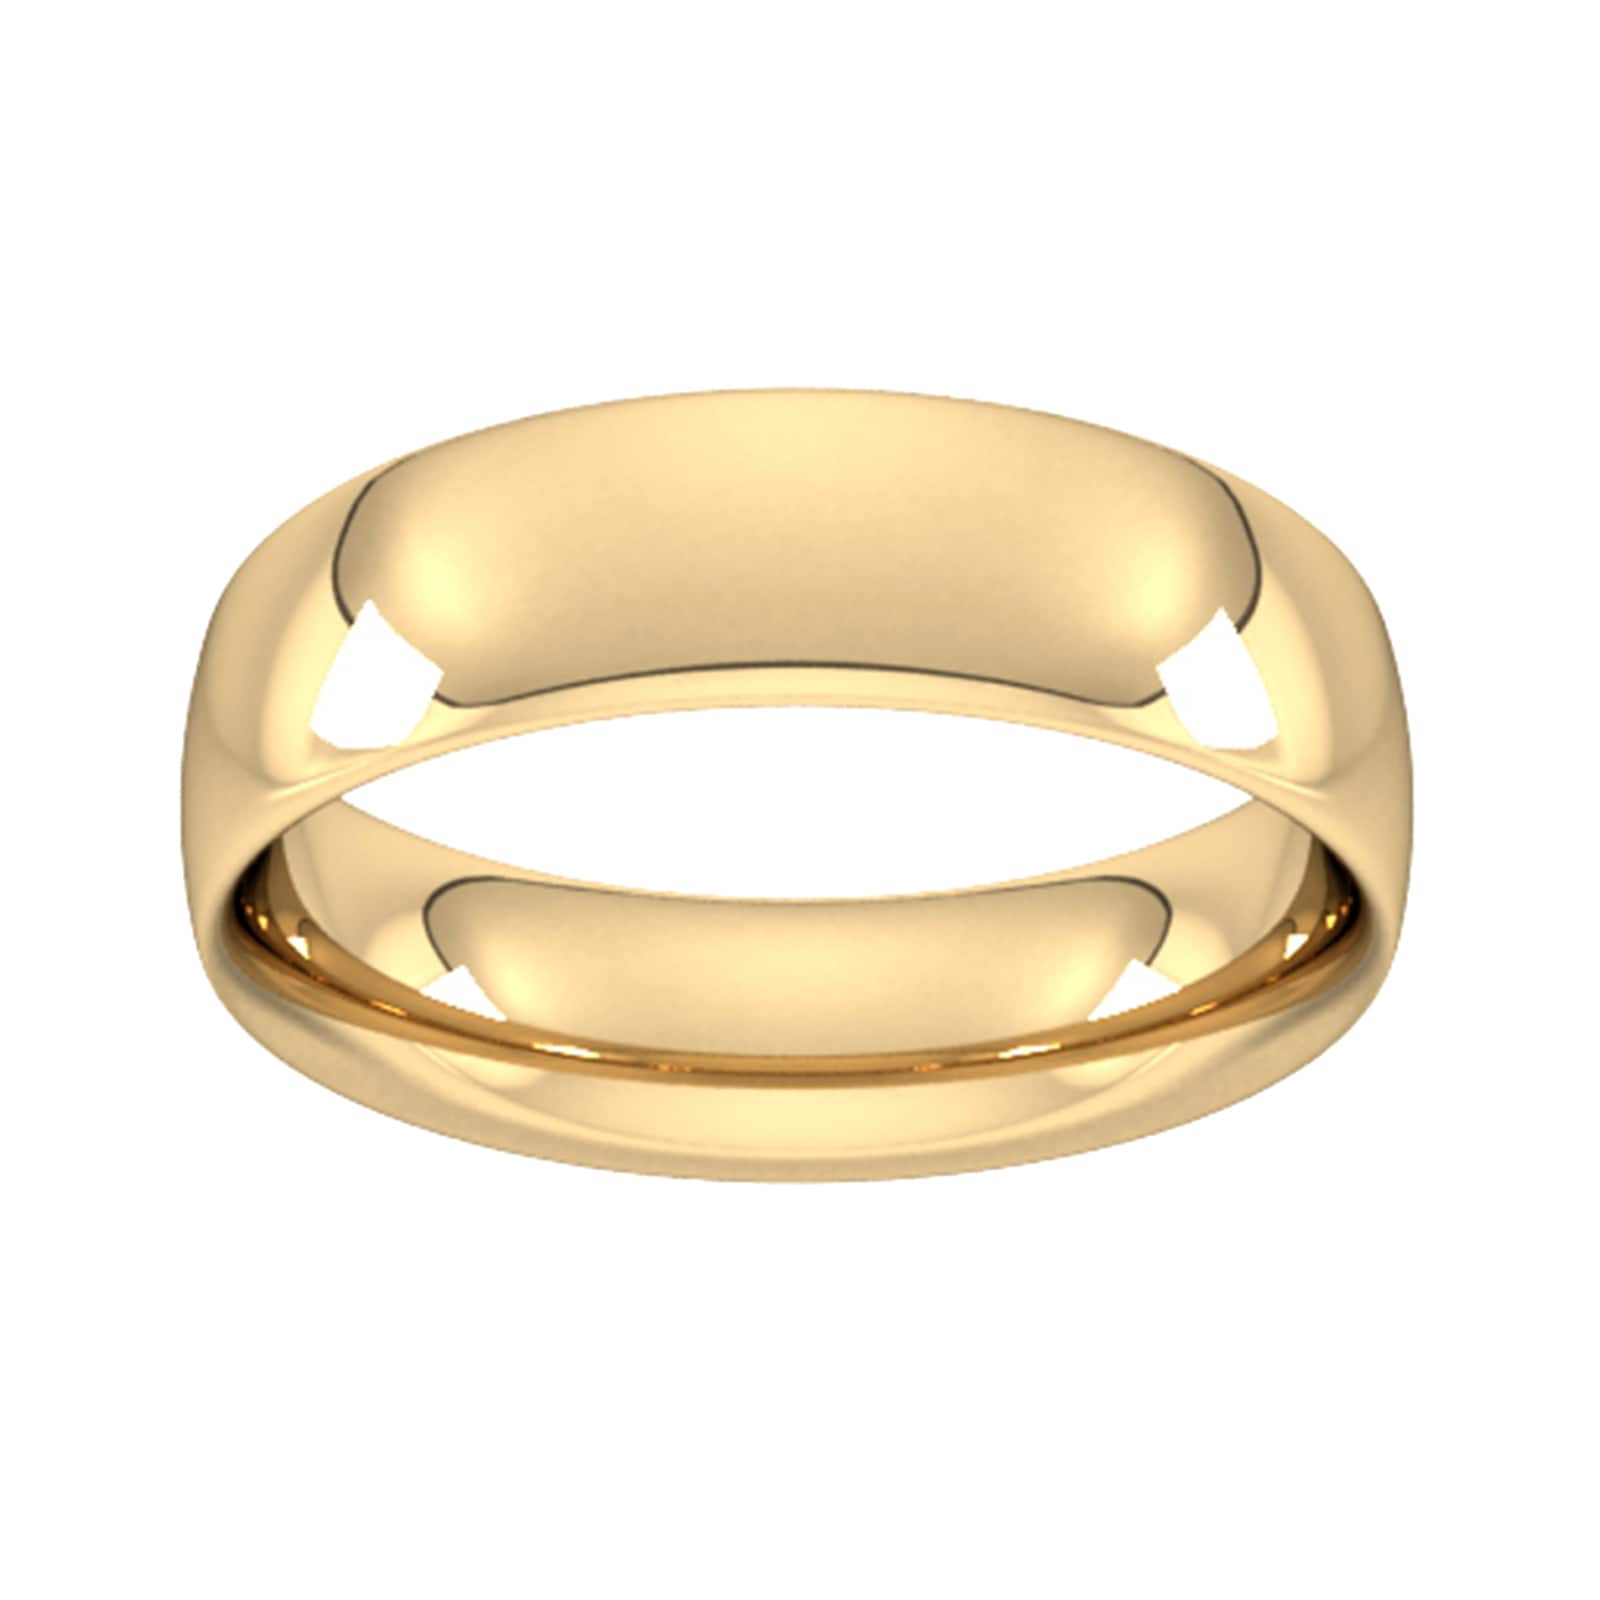 6mm Traditional Court Heavy Wedding Ring In 18 Carat Yellow Gold - Ring Size Q